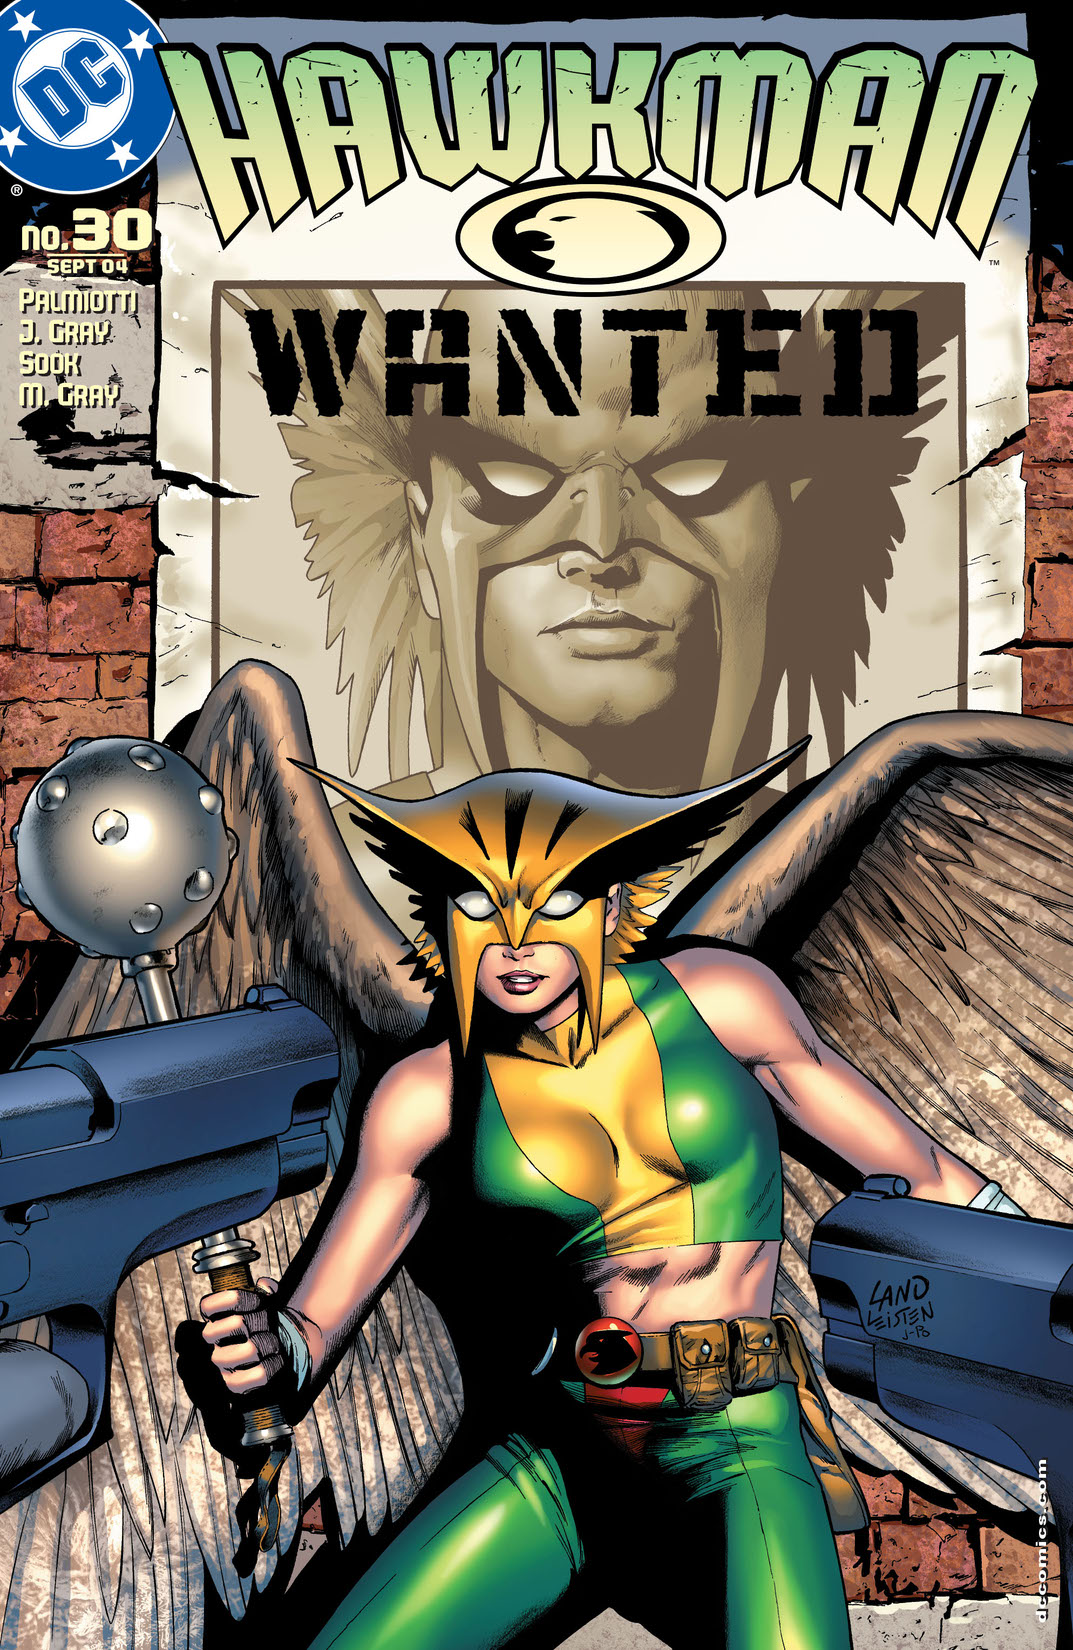 Hawkman (2002-) #30 preview images